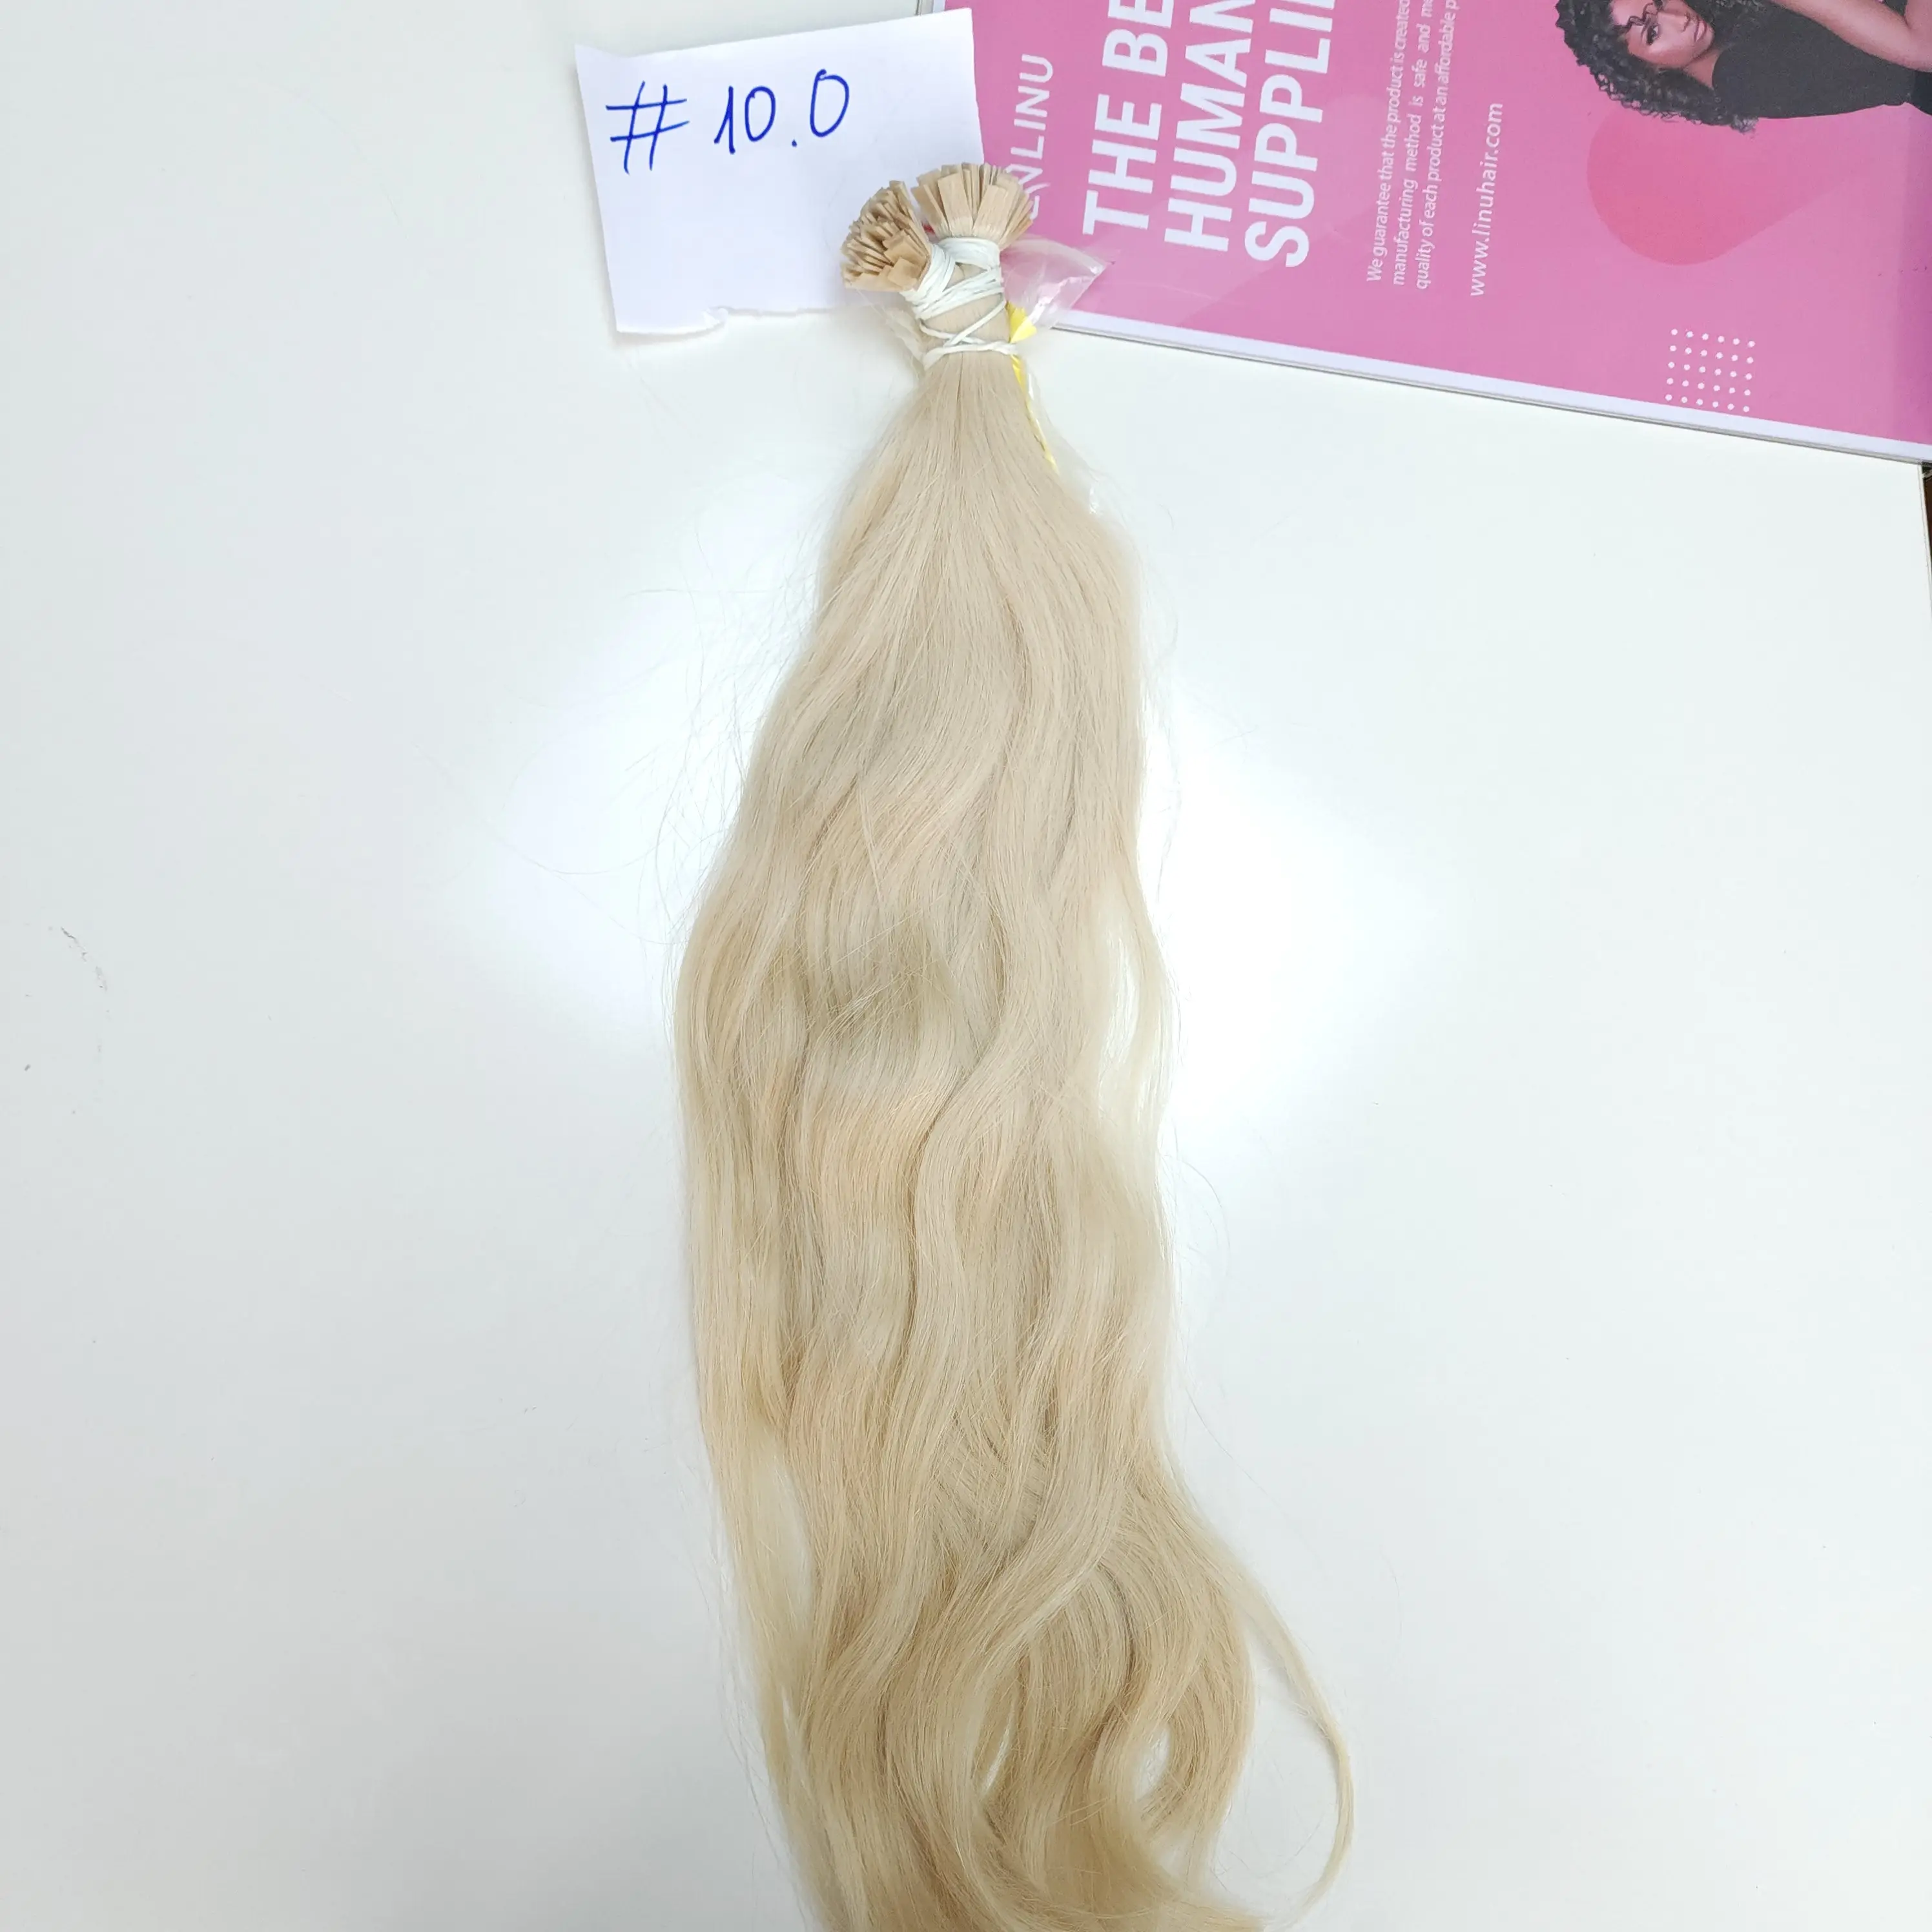 High Quality Natural Wave Light Color 100 Vietnamese Human Hair Hair Extensions Affordable Price Shipping Worldwide